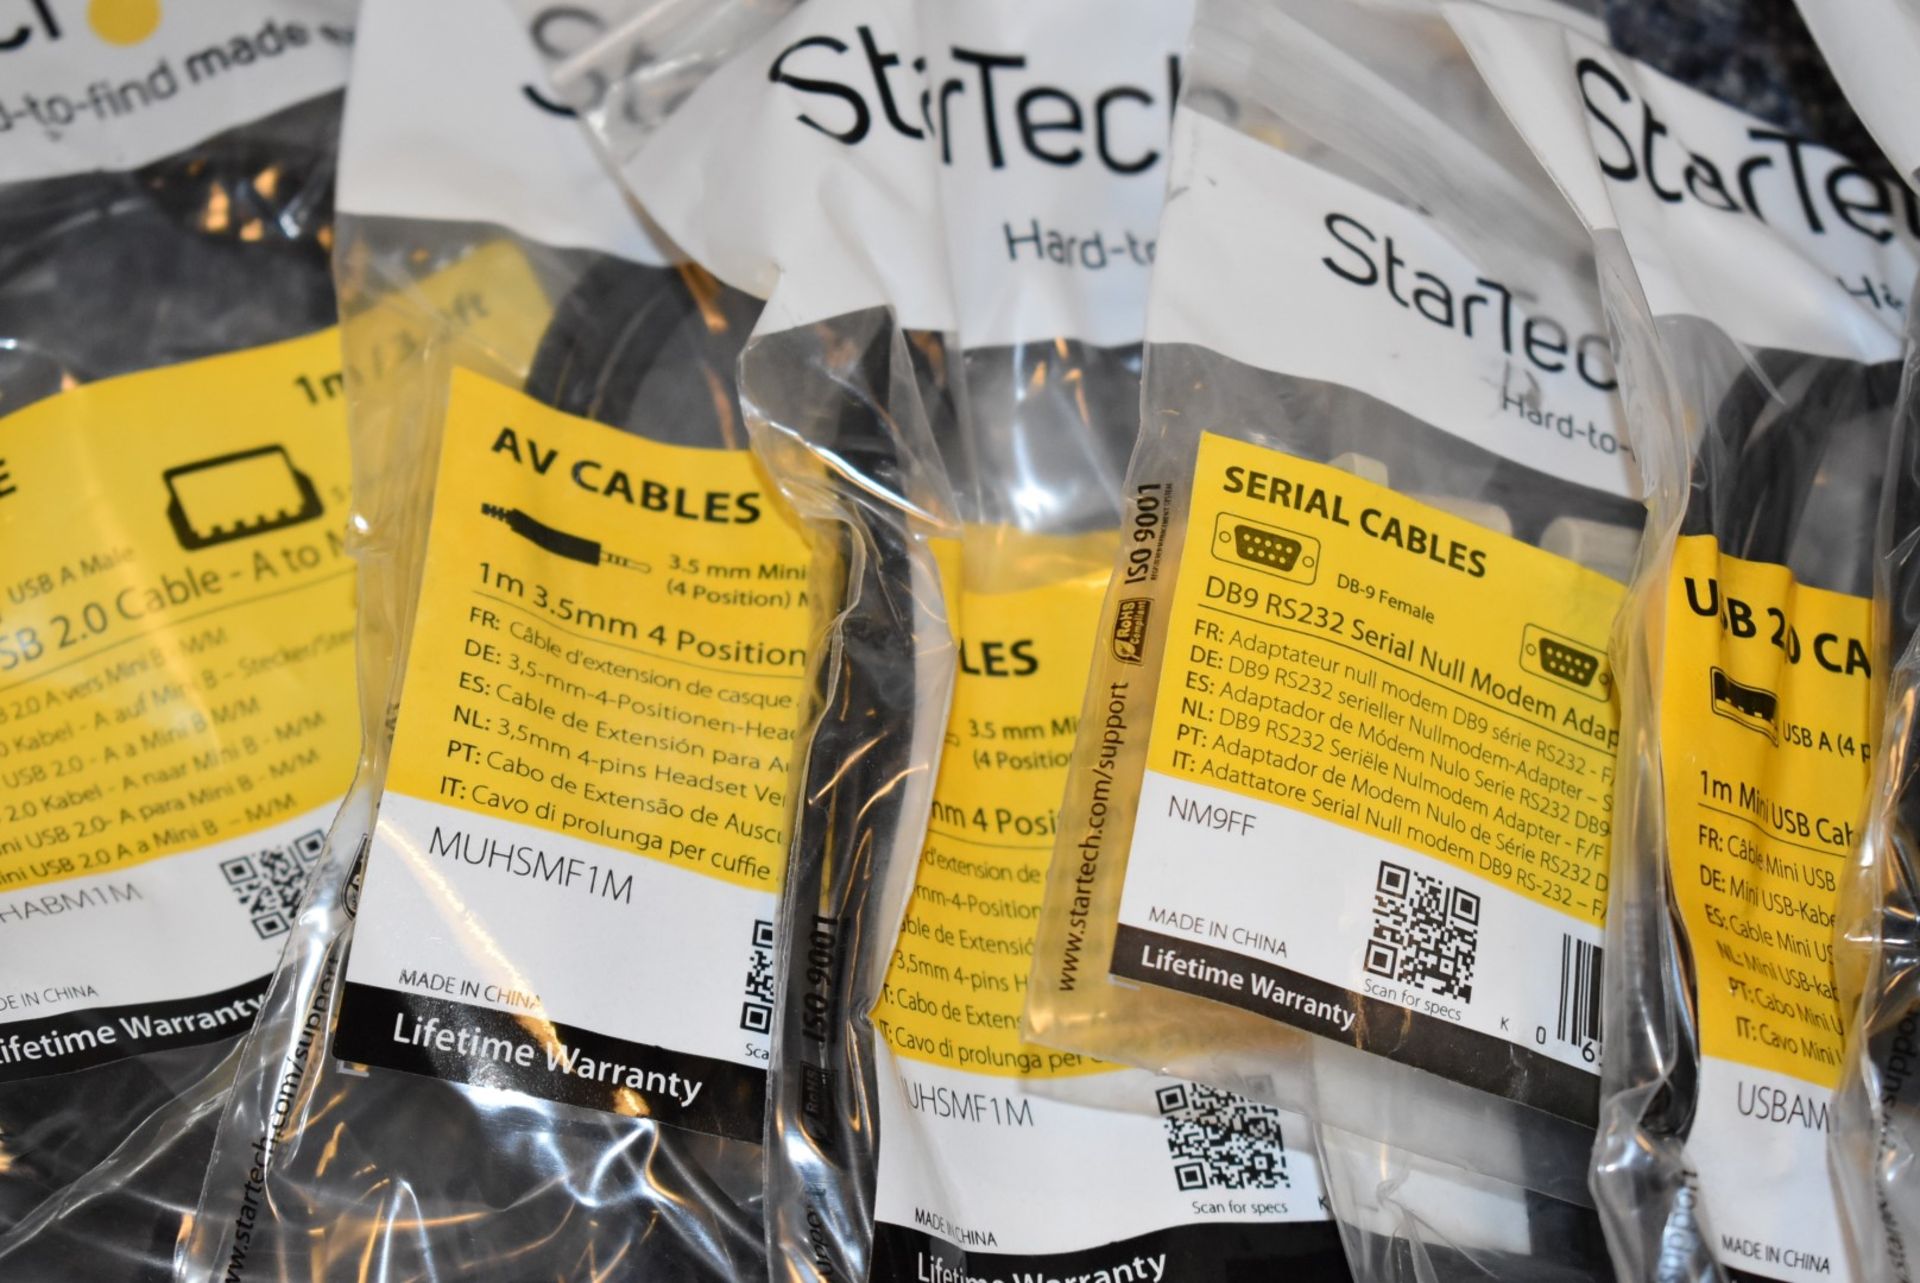 177 x Assorted StarTech Cables - Huge Lot in Original Packing - Various Cables Included - Image 14 of 50